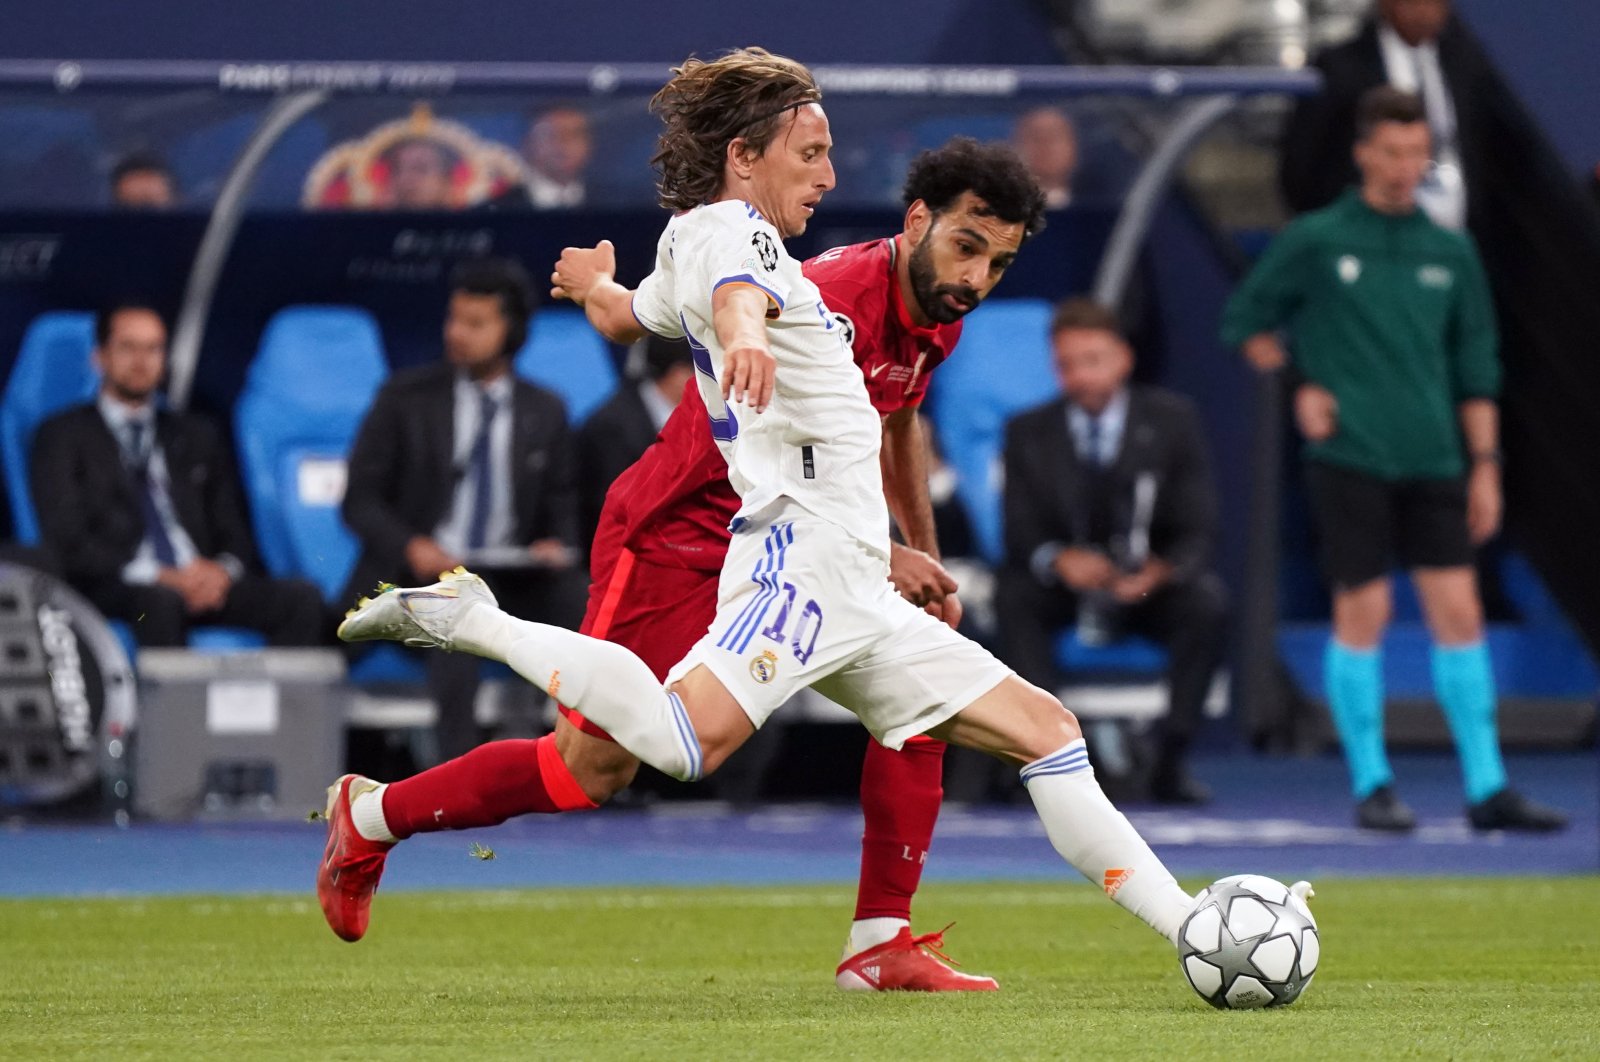 Real Madrid Luka Modric in action under pressure from Liverpool Mohamed Salah during the UEFA Champions League final match between Liverpool FC and Real Madrid at Stade de France. Paris, France, May 28, 2022. (Getty Images Photo)